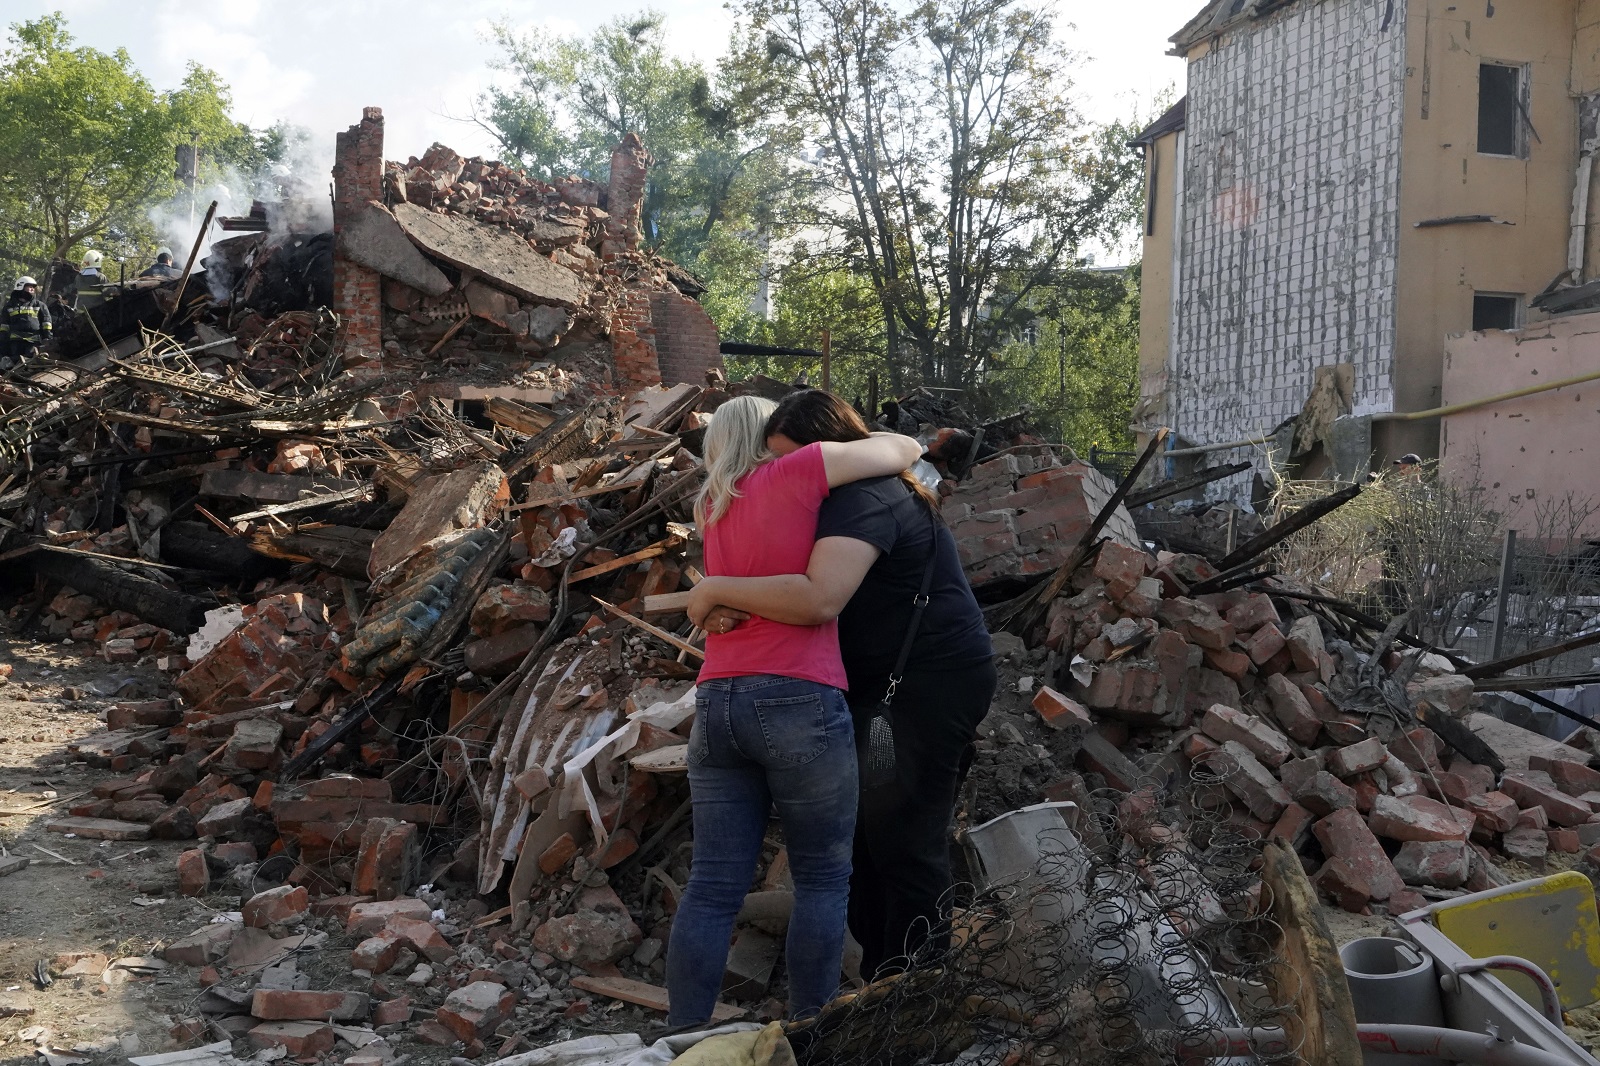 epa10127151 Women hug near the debris of a building that was damaged after a rocket hit the Saltivka area in Kharkiv, Ukraine, 18 August 2022. At least seven people were killed and 17 injured during the attack according to the Ukrainian State Emergency Service. A total of at least 11 people were  killed and 37 injured in the entire Kharkiv region during the overnight attack, the head of Kharkiv oblast military administration said. Kharkiv and surrounding areas have been the target of heavy shelling since February 2022, when Russian troops entered Ukraine starting a conflict that has provoked destruction and a humanitarian crisis.  EPA/VASILIY ZHLOBSKY